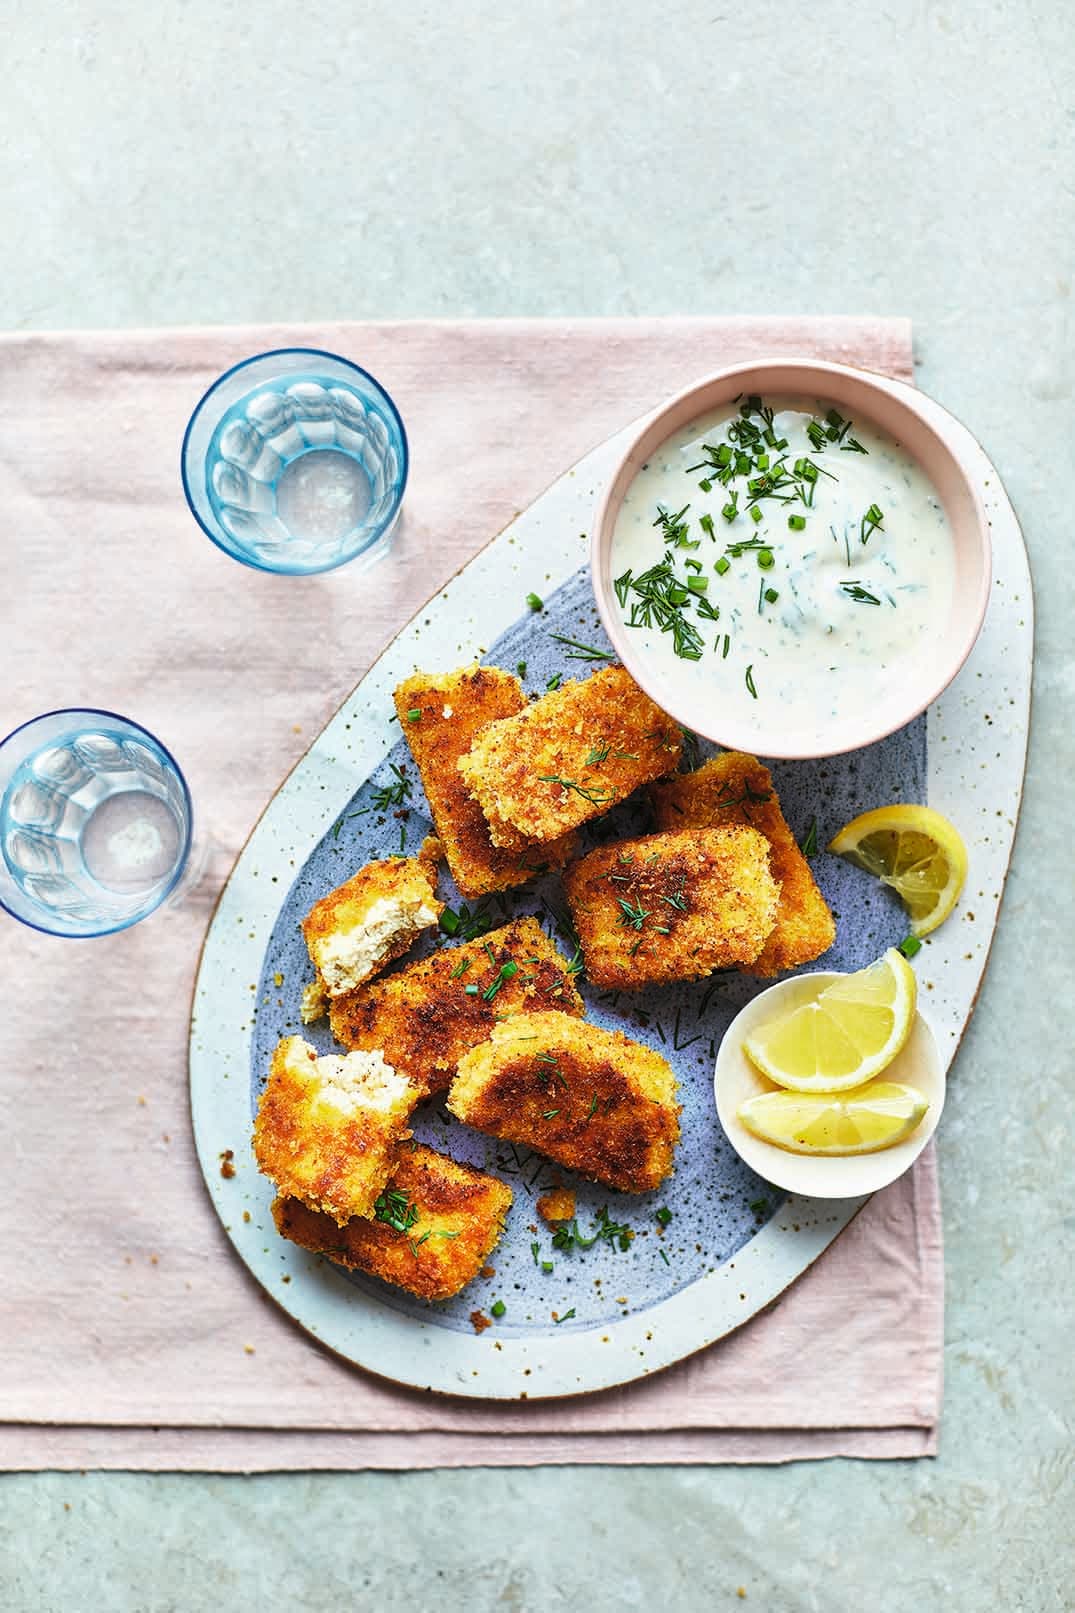 Photo of Tofu nuggets with ranch-style dressing by WW